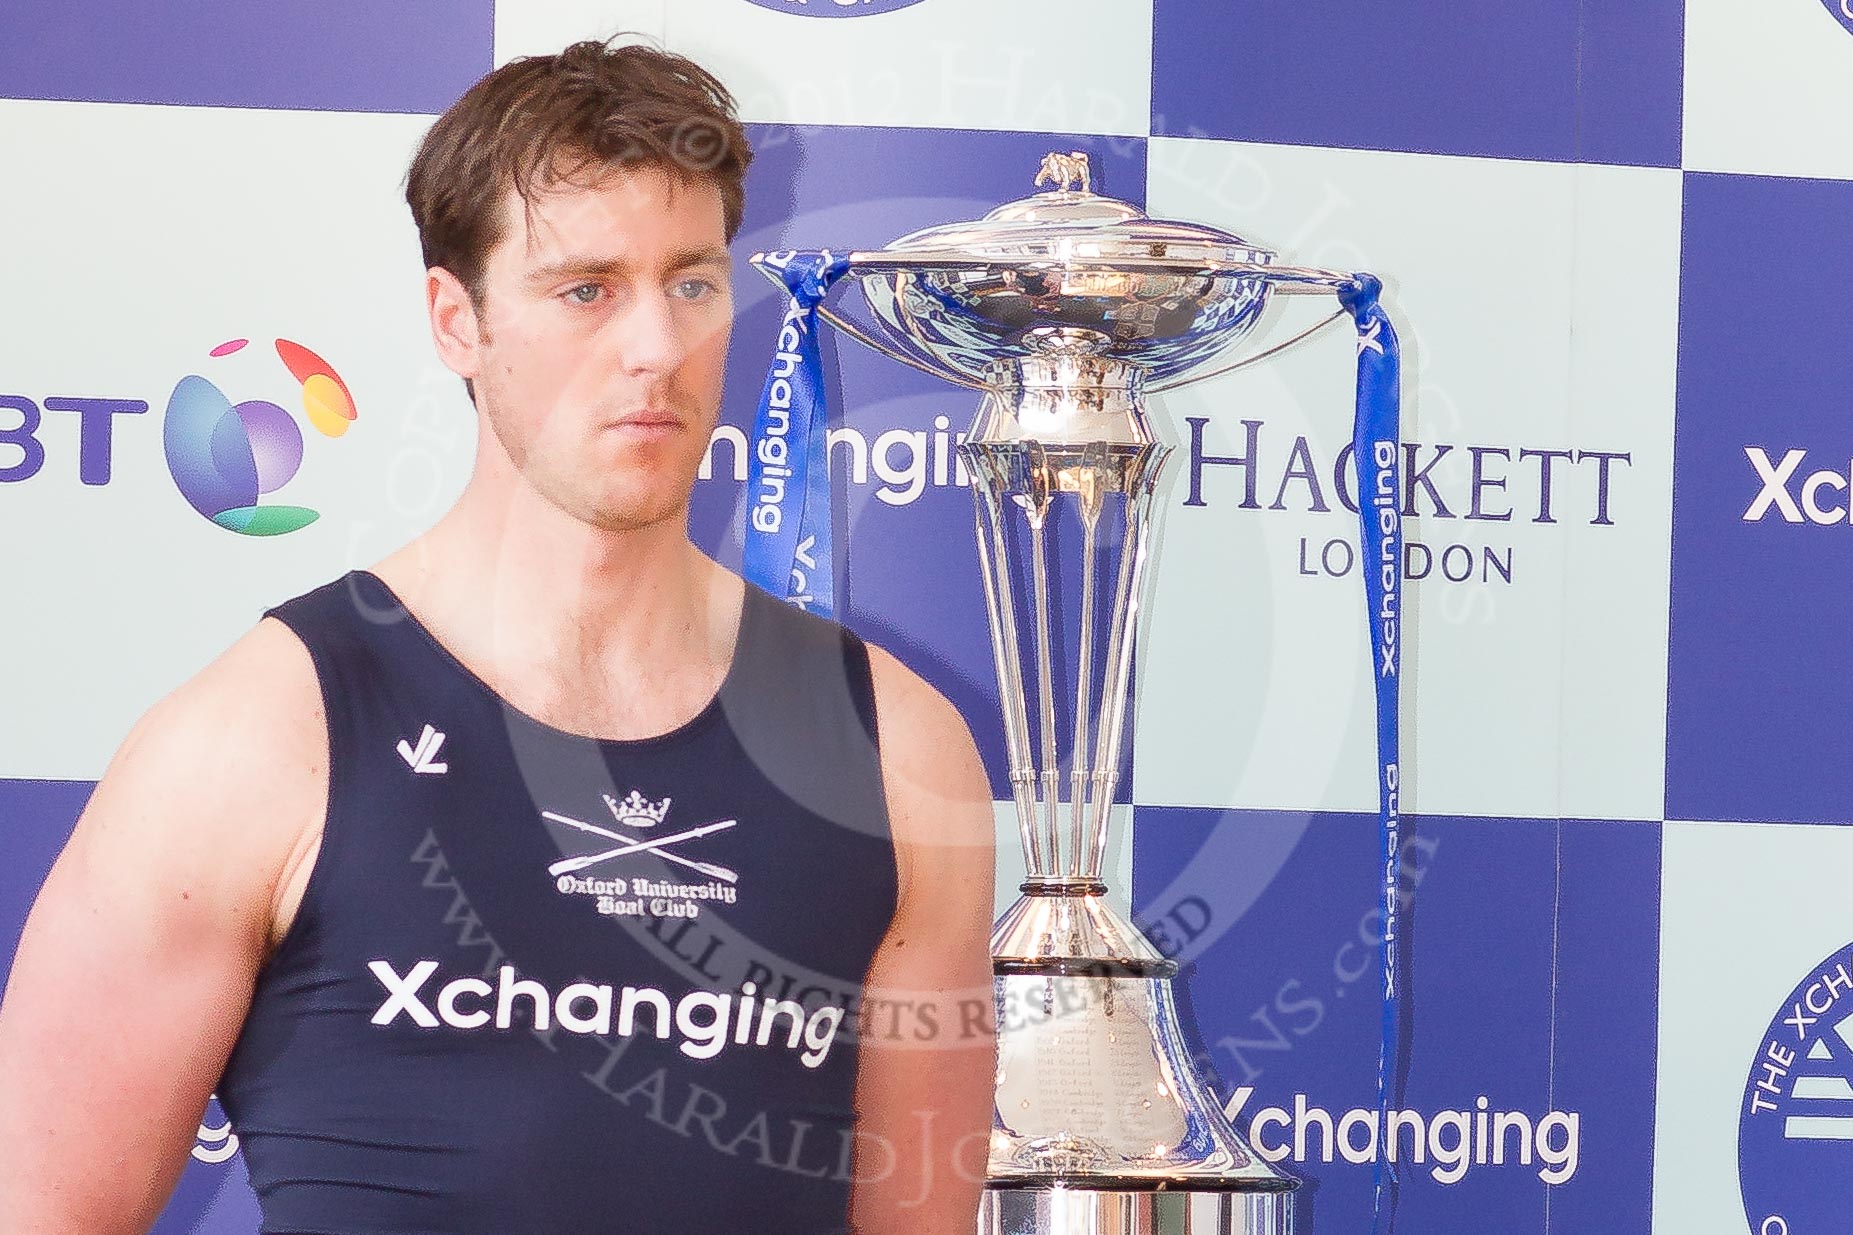 The Boat Race season 2012 - Crew Announcement and Weigh In: Oxford: Stroke Roel Haen, Dutch, 96.8kg..
Forman's Fish Island,
London E3,

United Kingdom,
on 05 March 2012 at 10:19, image #32